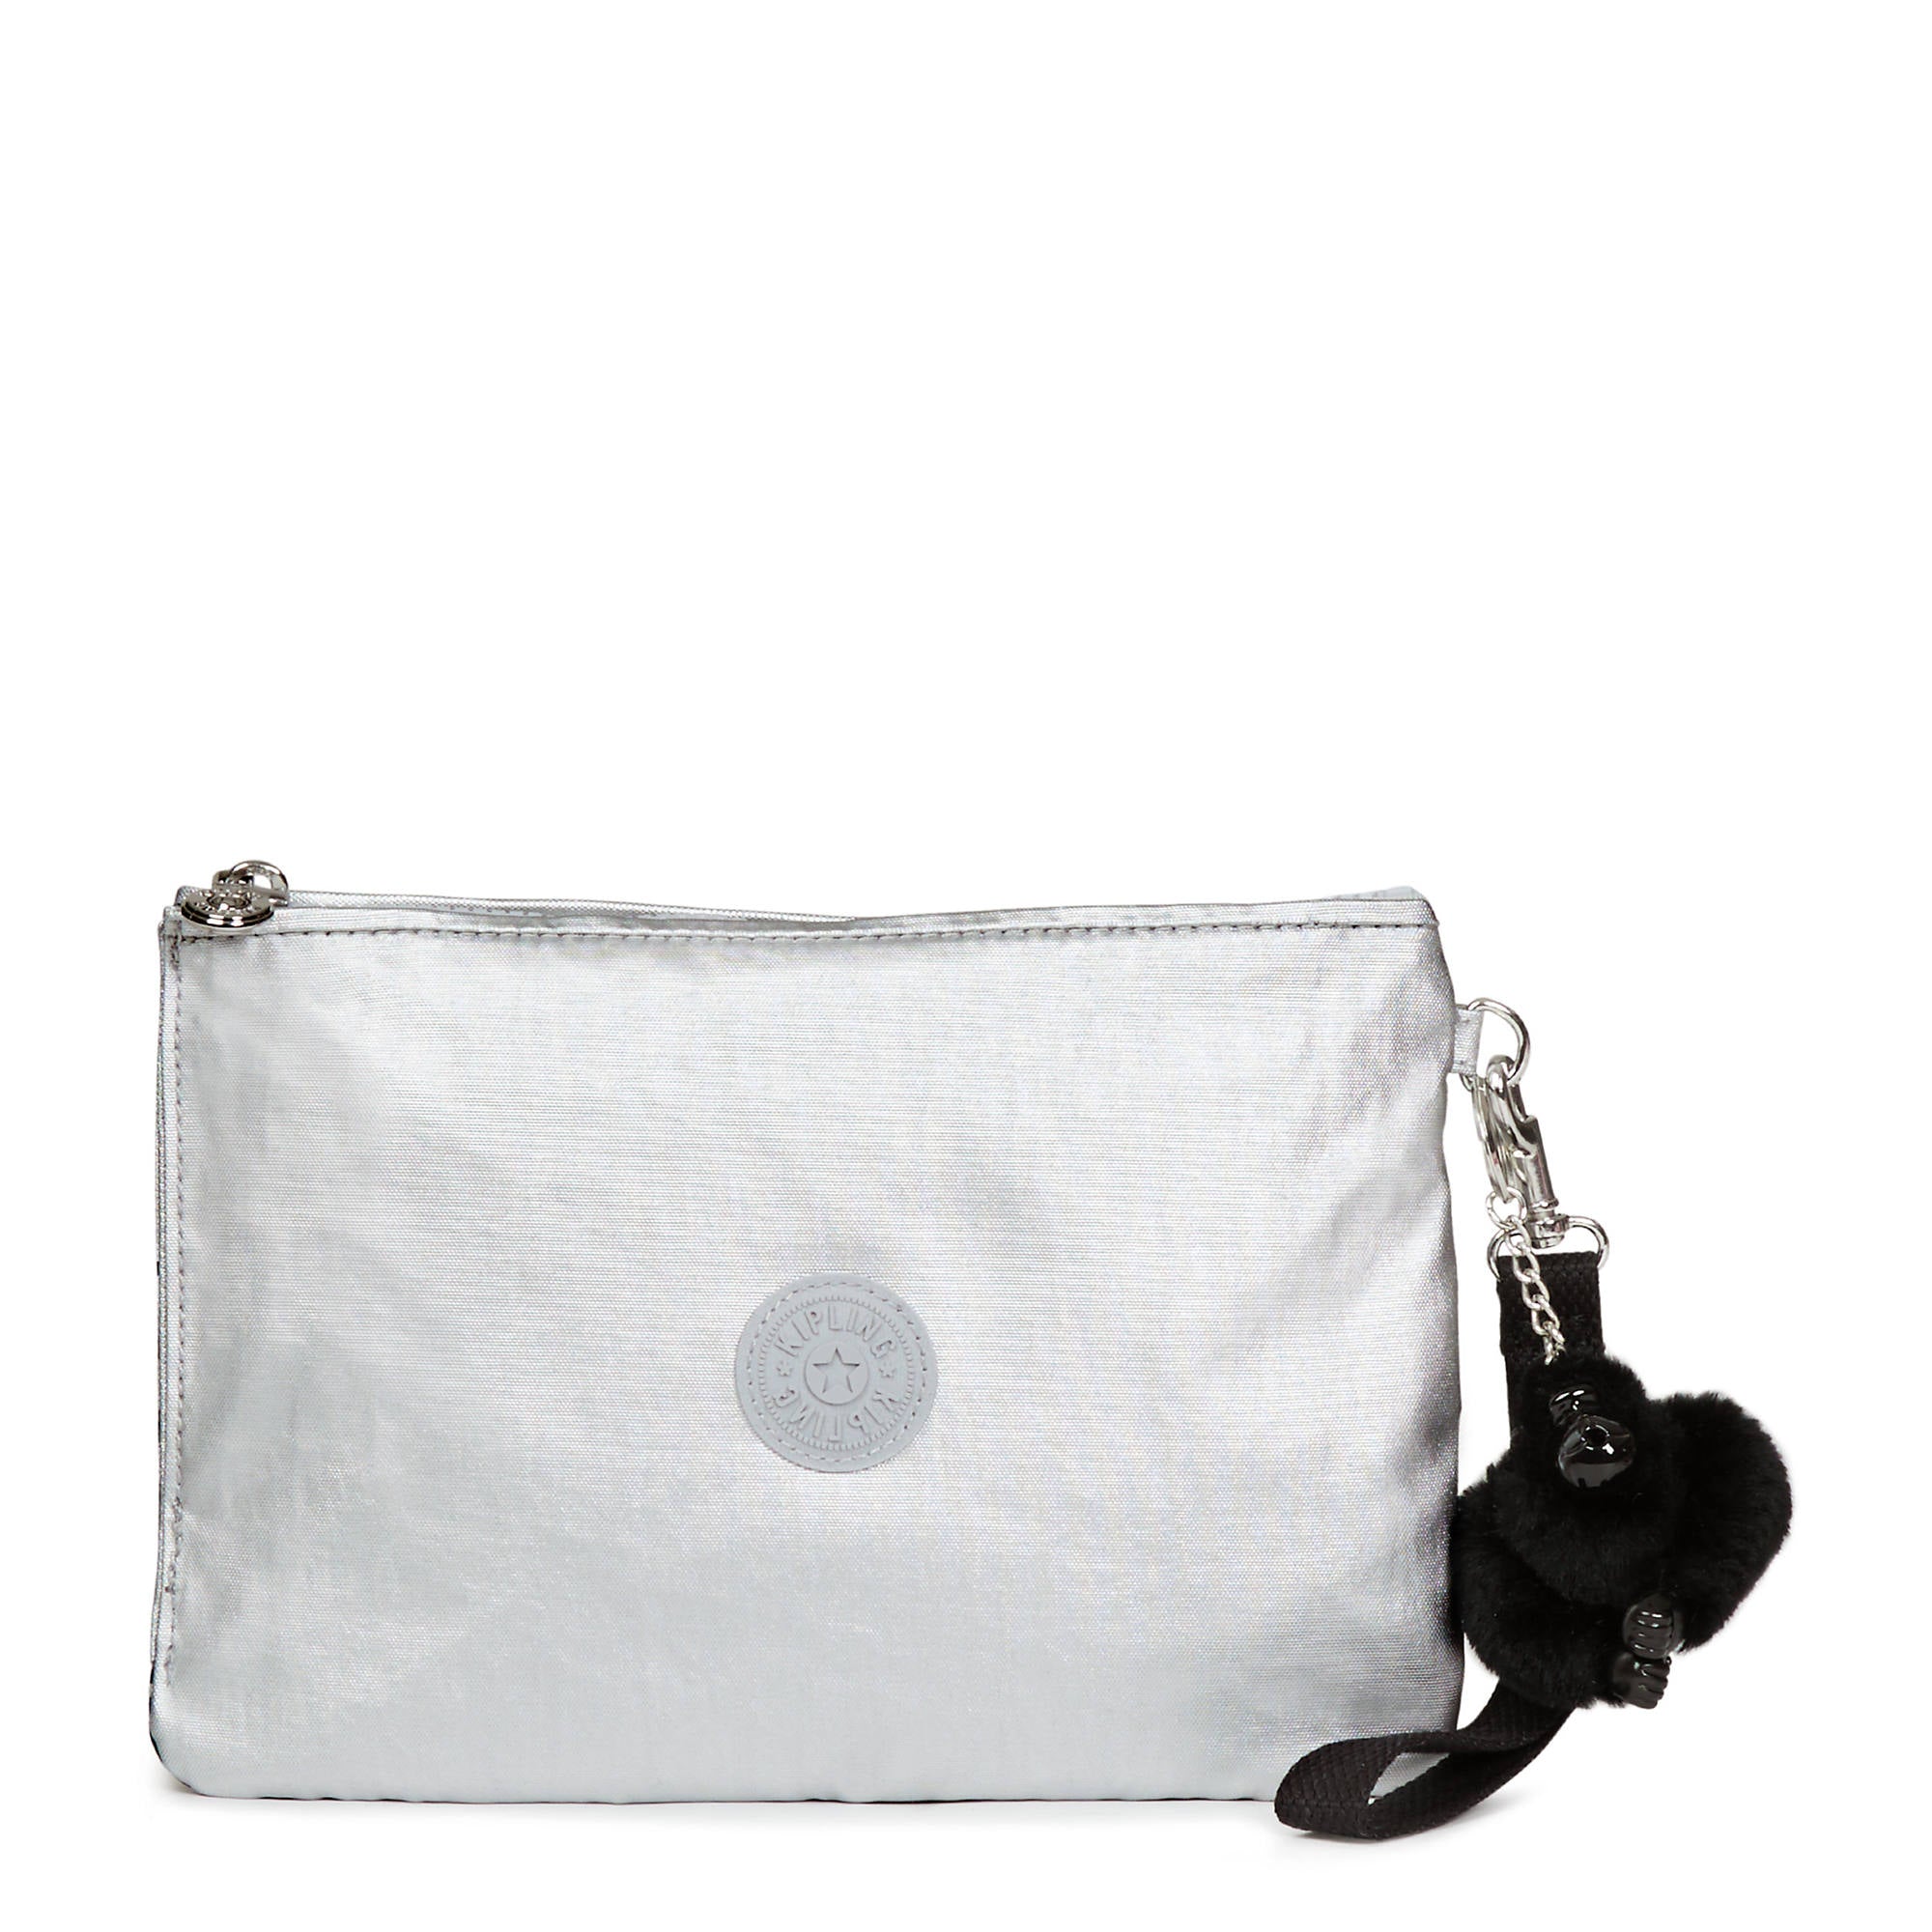 kipling Ellettronico Star Wars Large Cosmetic Pouch – Pit-a-Pats.com